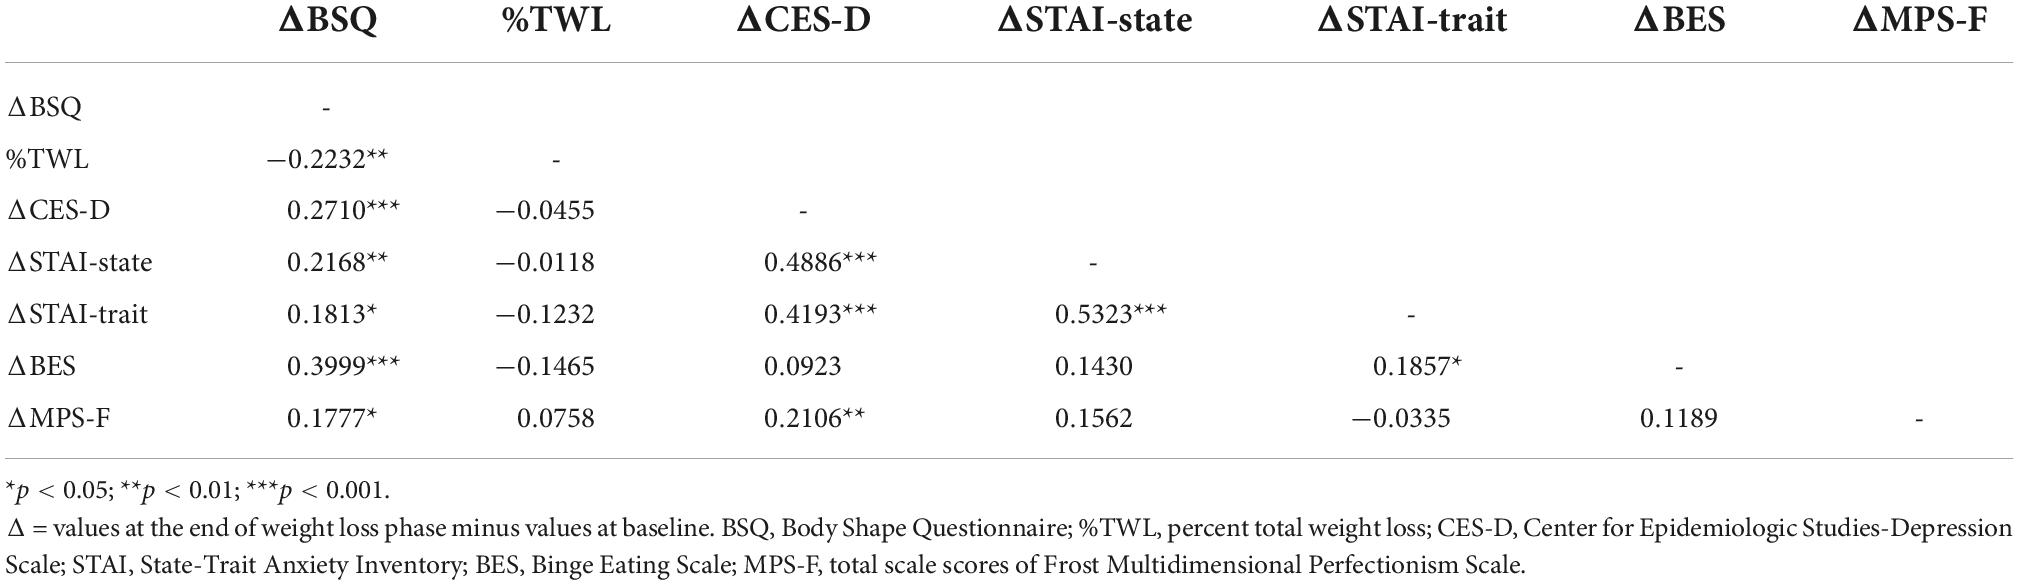 Development and validation of the body shape scale (BOSHAS) for